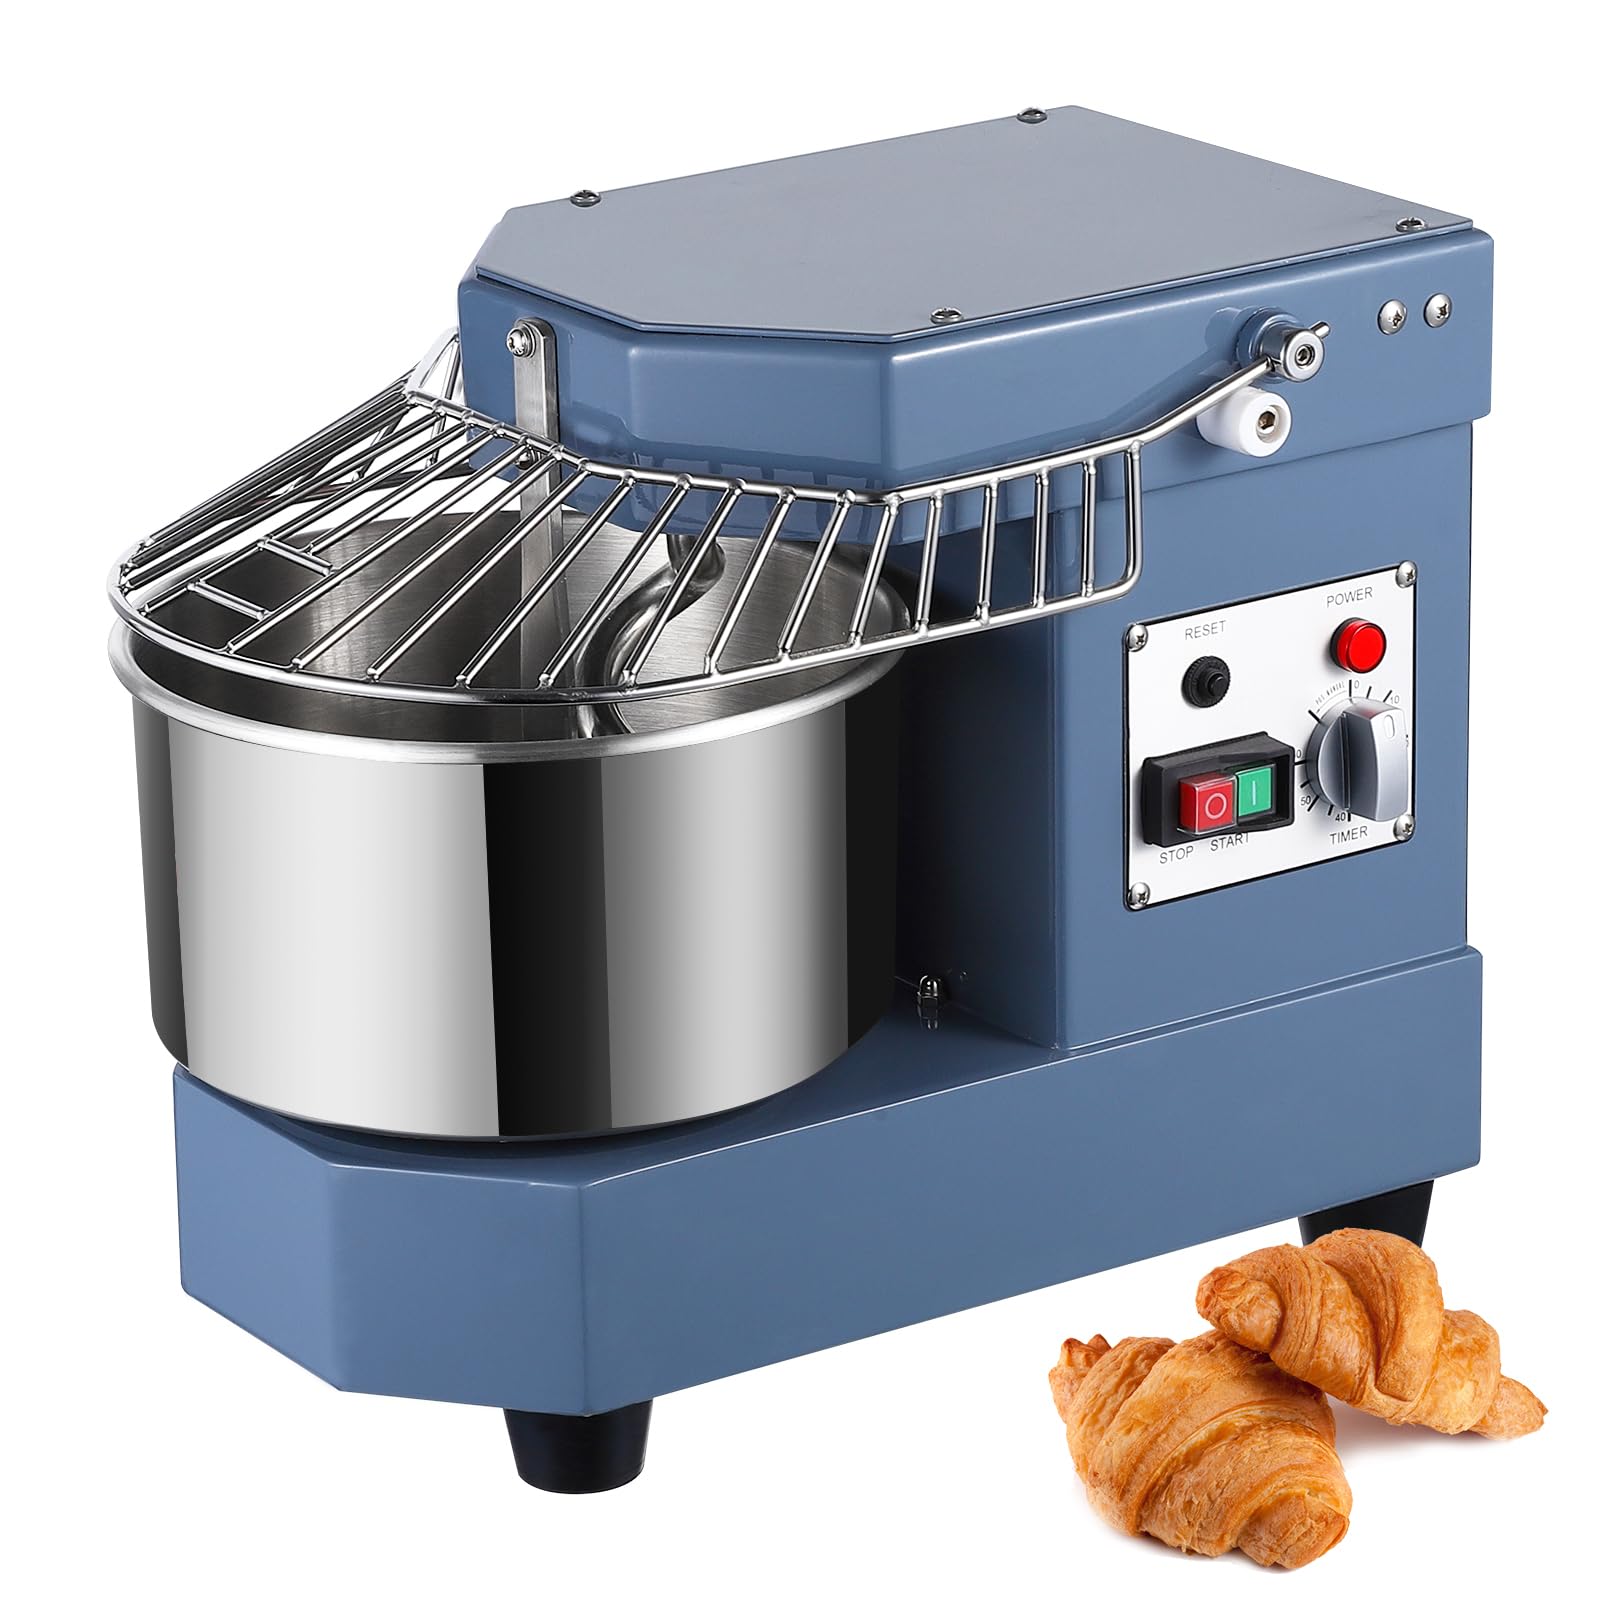 Commercial Dough Mixer, Garvee 8Qt Food Mixer 450W Dual Rotating Dough Kneading Machine with Stainless Steel Bowl, Stand Mixer with Safety Shield, 110V for Restaurant, Bakeries, Pizzeria